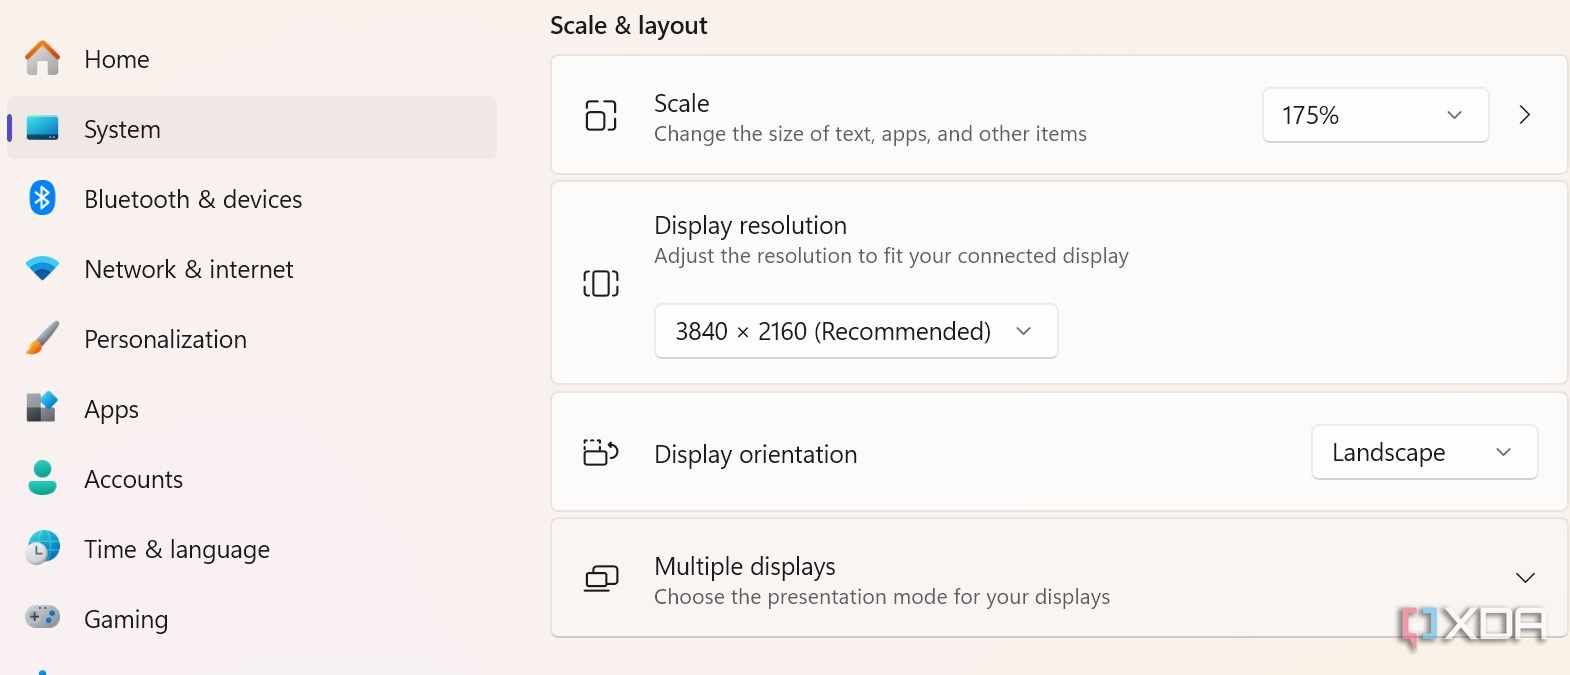 scale and layout settings in Windows